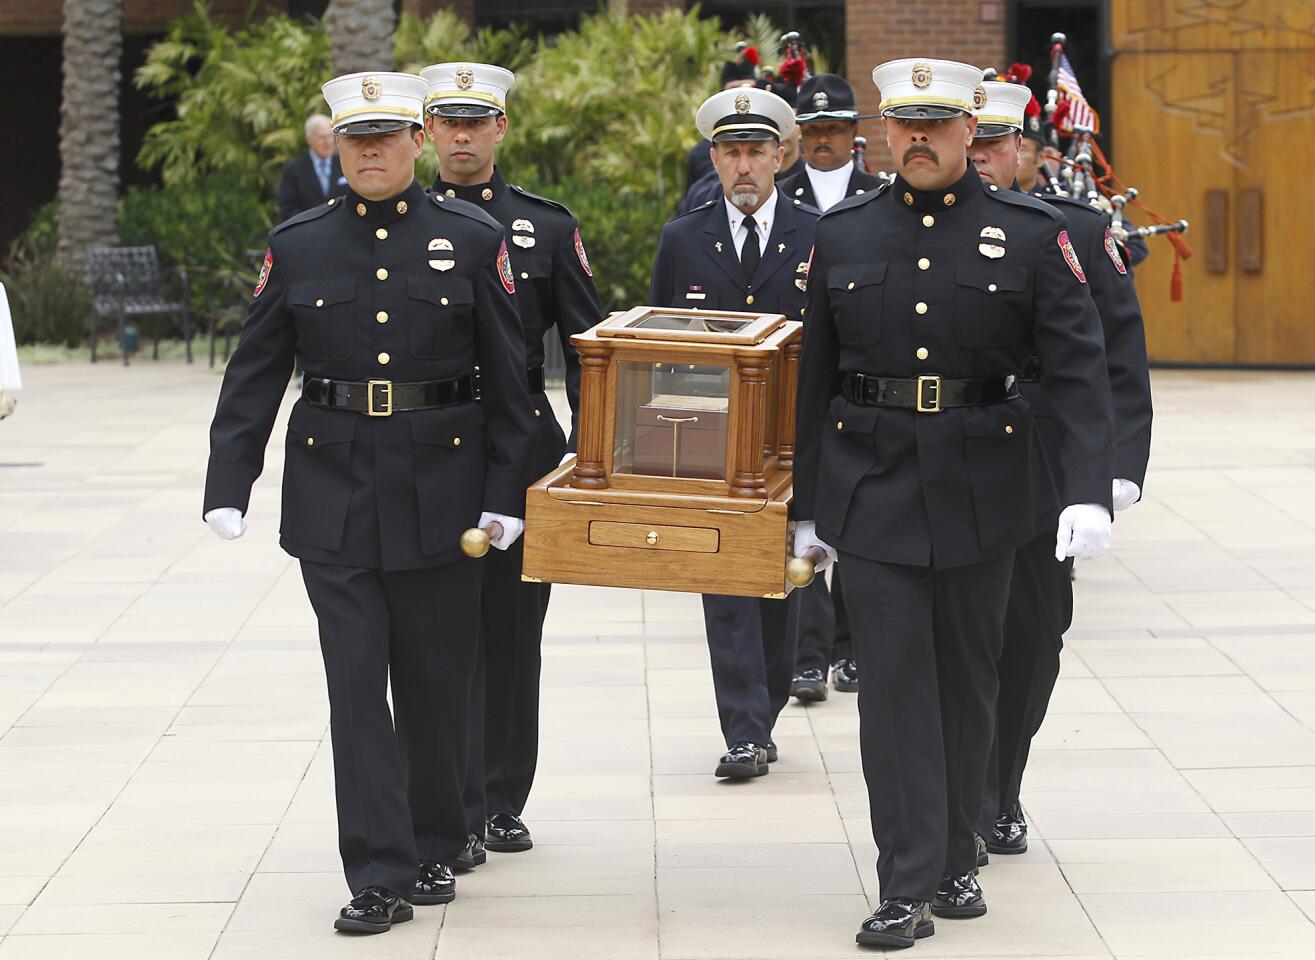 Members of the Anaheim Fire Depatment's Search and Rescue team carry the remains of Grant McKee, 21, for his memorial service in the St. Andrew's Presbyterian Church sanctuary, Saturday. McKee grew up in Costa Mesa and was one of 19 members of the Granite Mountain Hotshot firefighting crew killed in fast moving wildfire in Prescott, Ariz.